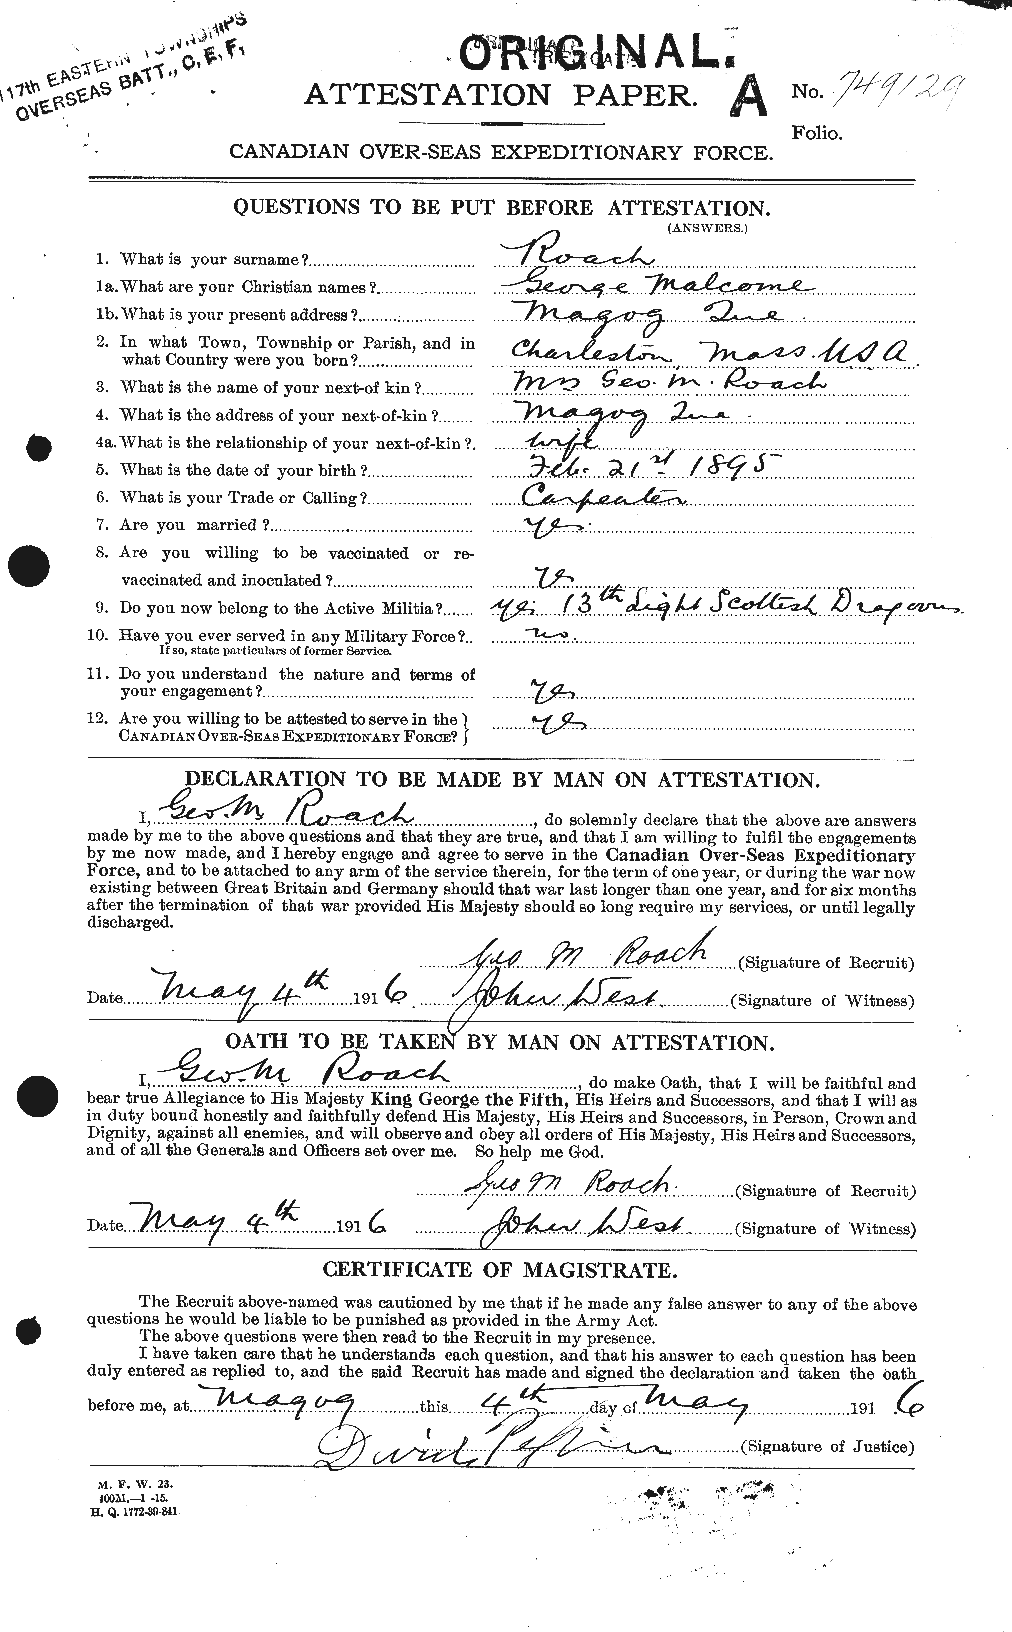 Personnel Records of the First World War - CEF 608367a